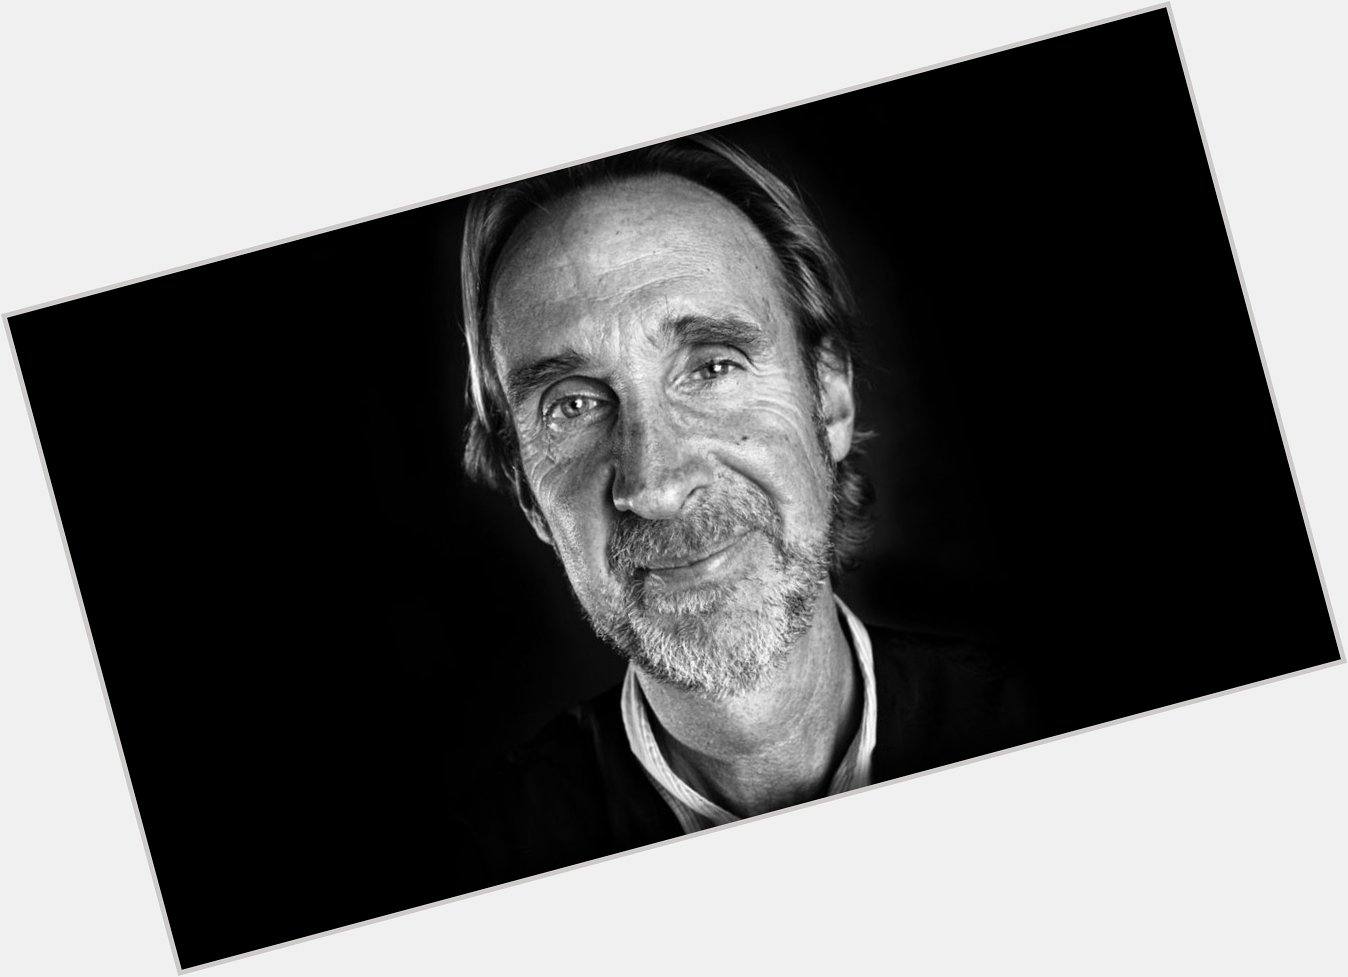 Happy birthday to Mike Rutherford, who is 67 today! 